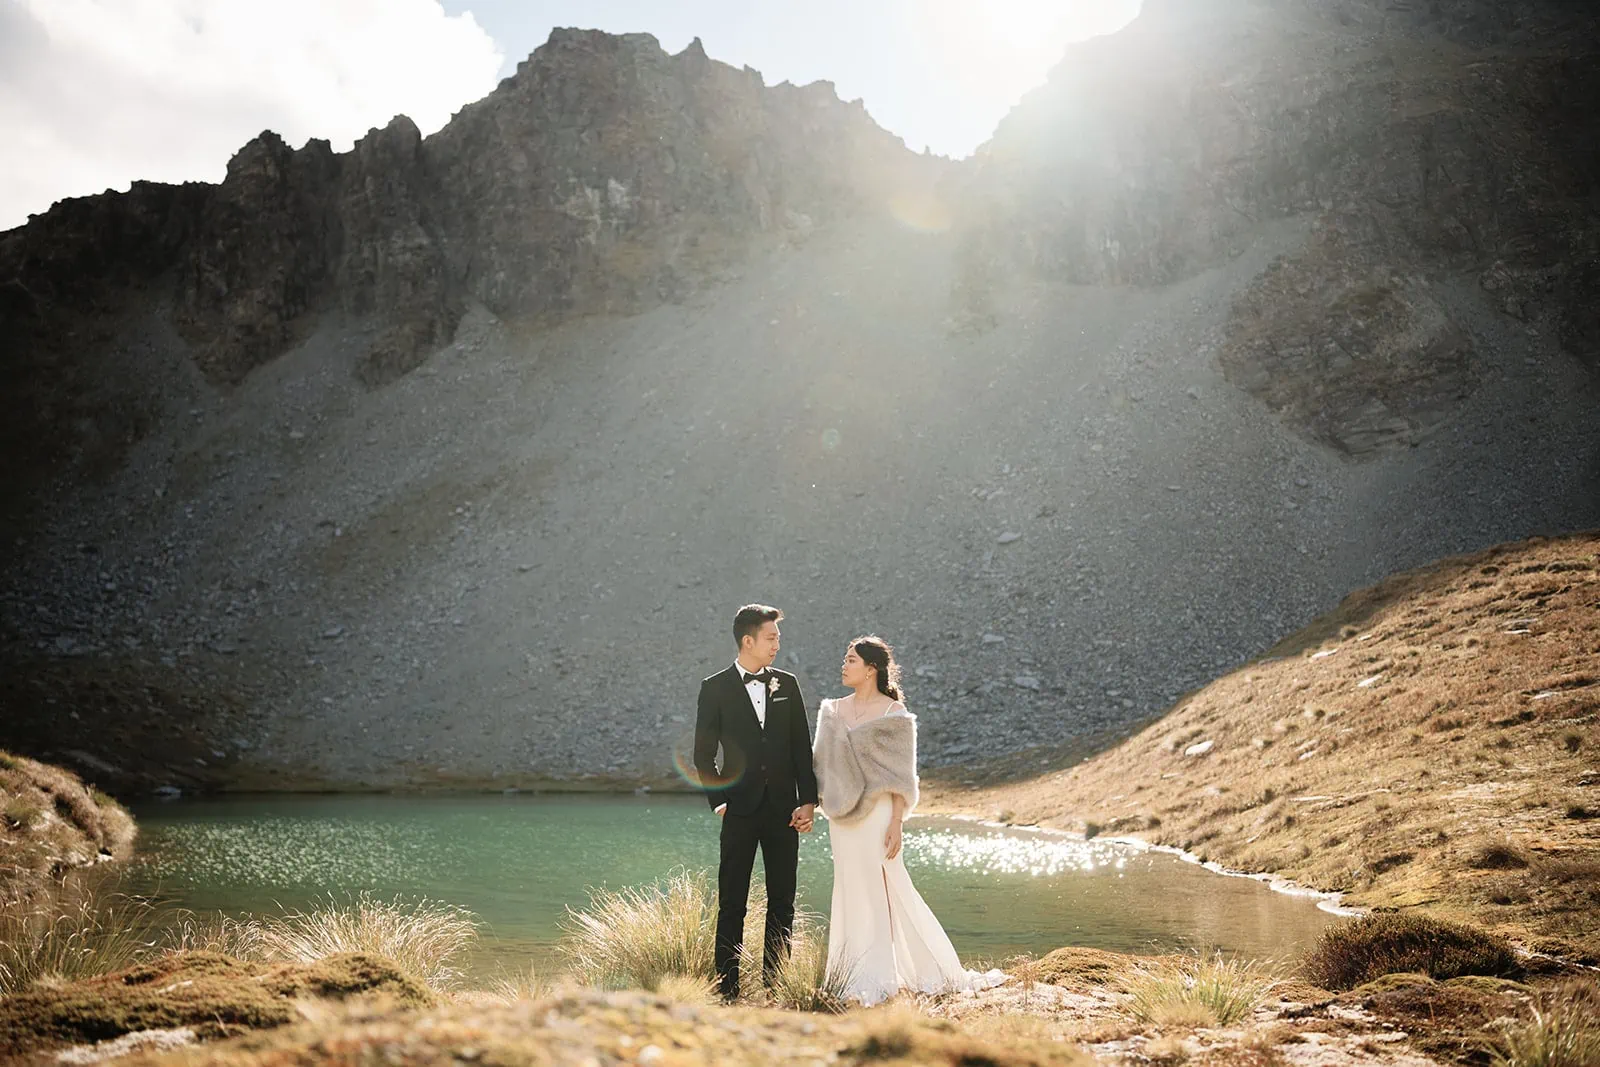 Keywords used: Queenstown Heli Pre Wedding, lake, mountains

Dios and Carlyn's pre-wedding shoot captures their love amidst the breathtaking queenstown heli mountains and a serene lakes